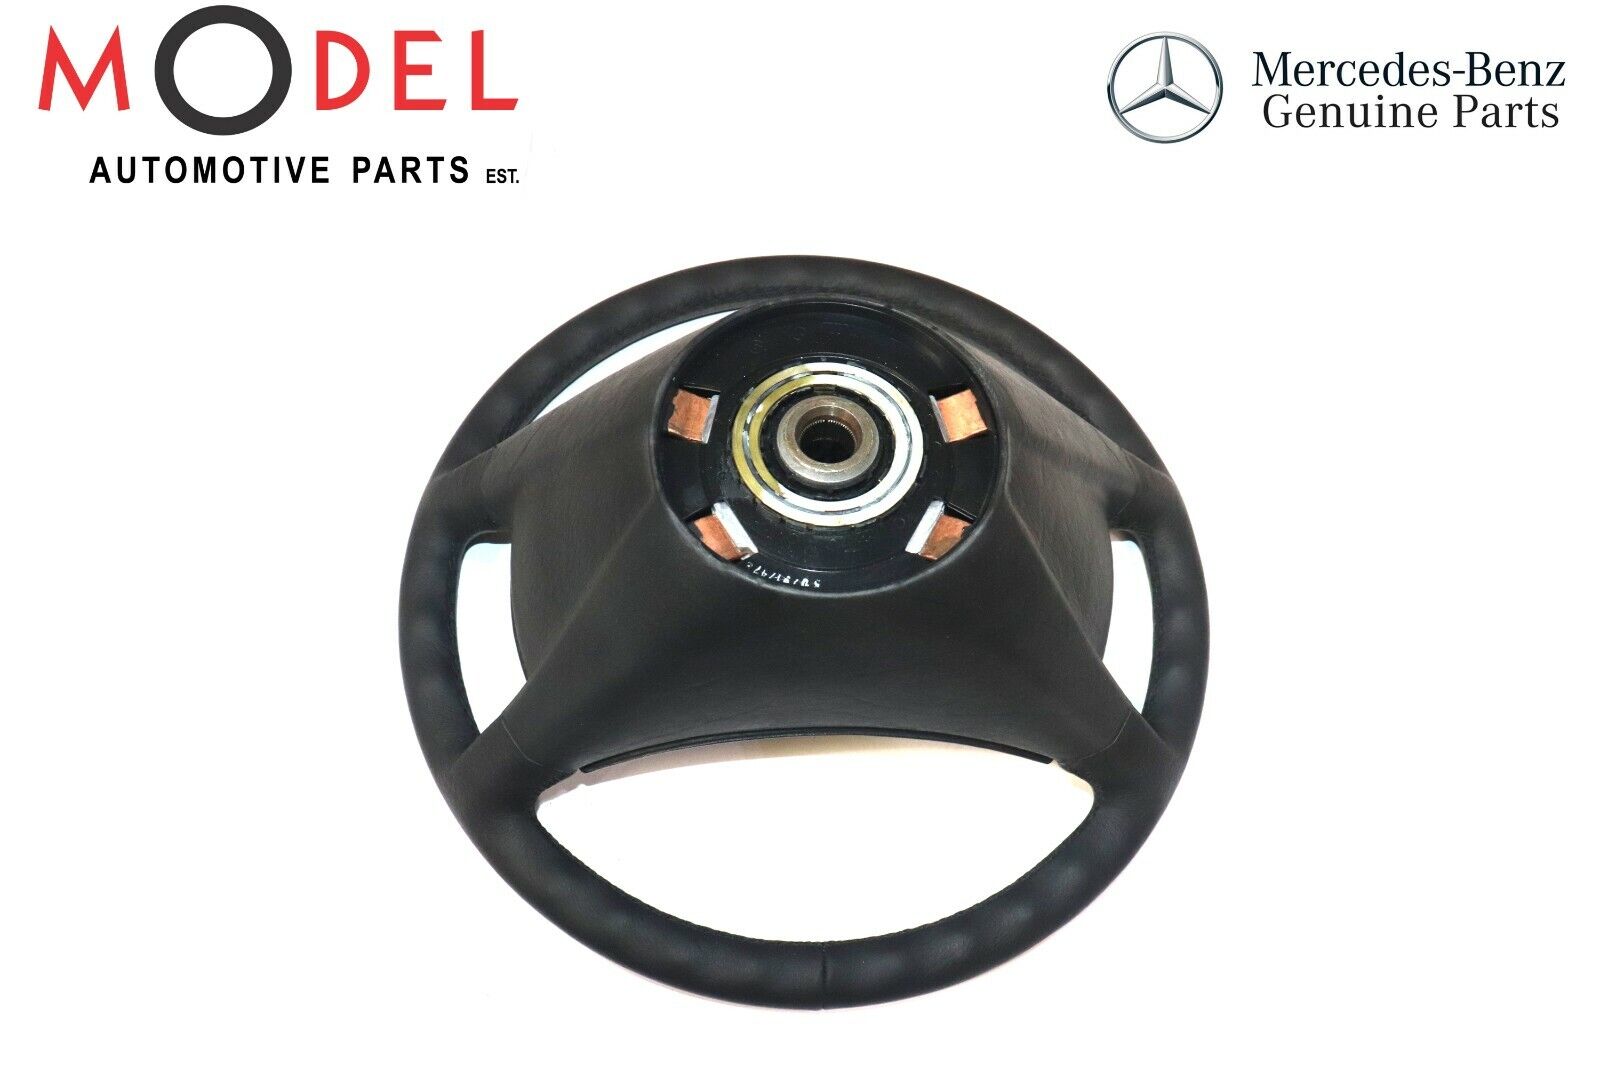 MERCEDES BENZ GENUINE NEW LEATHER STEREING WHEEL B66269521